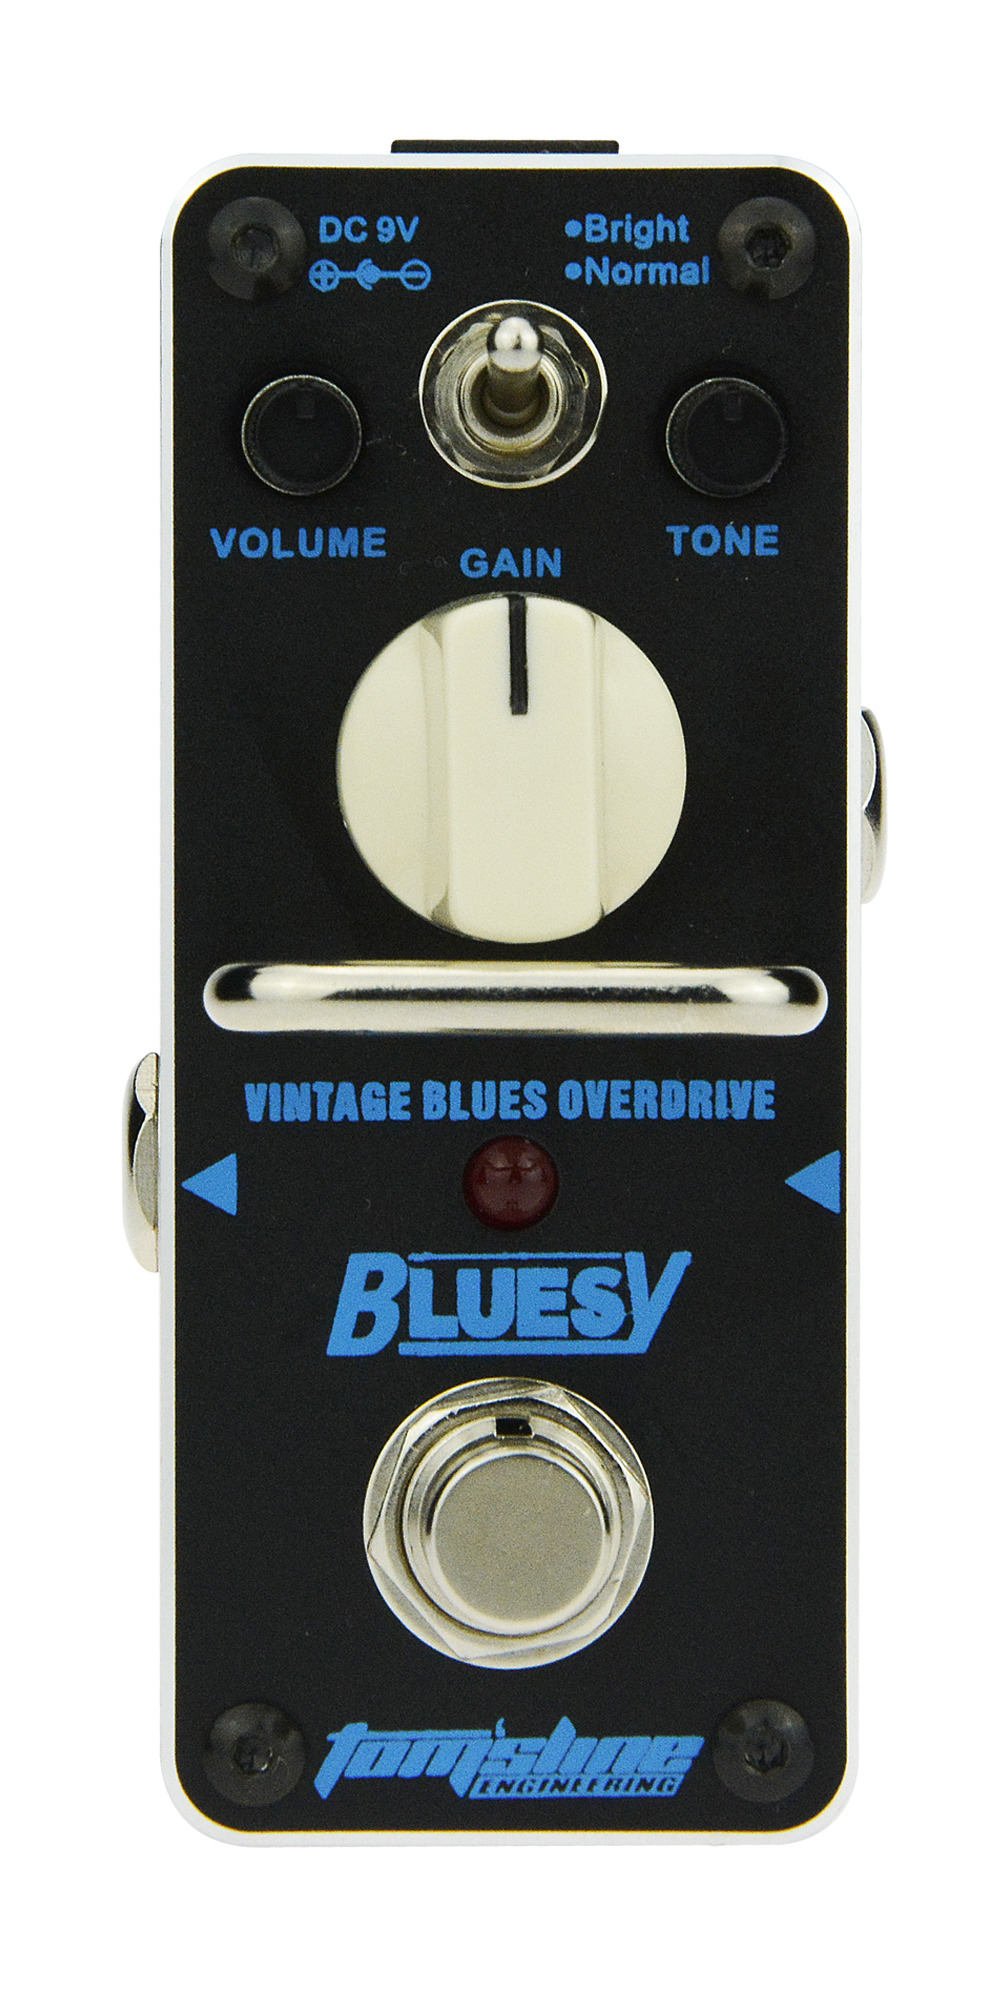 Tomsline Pedal ABY 3 - Bluesy Overdrive